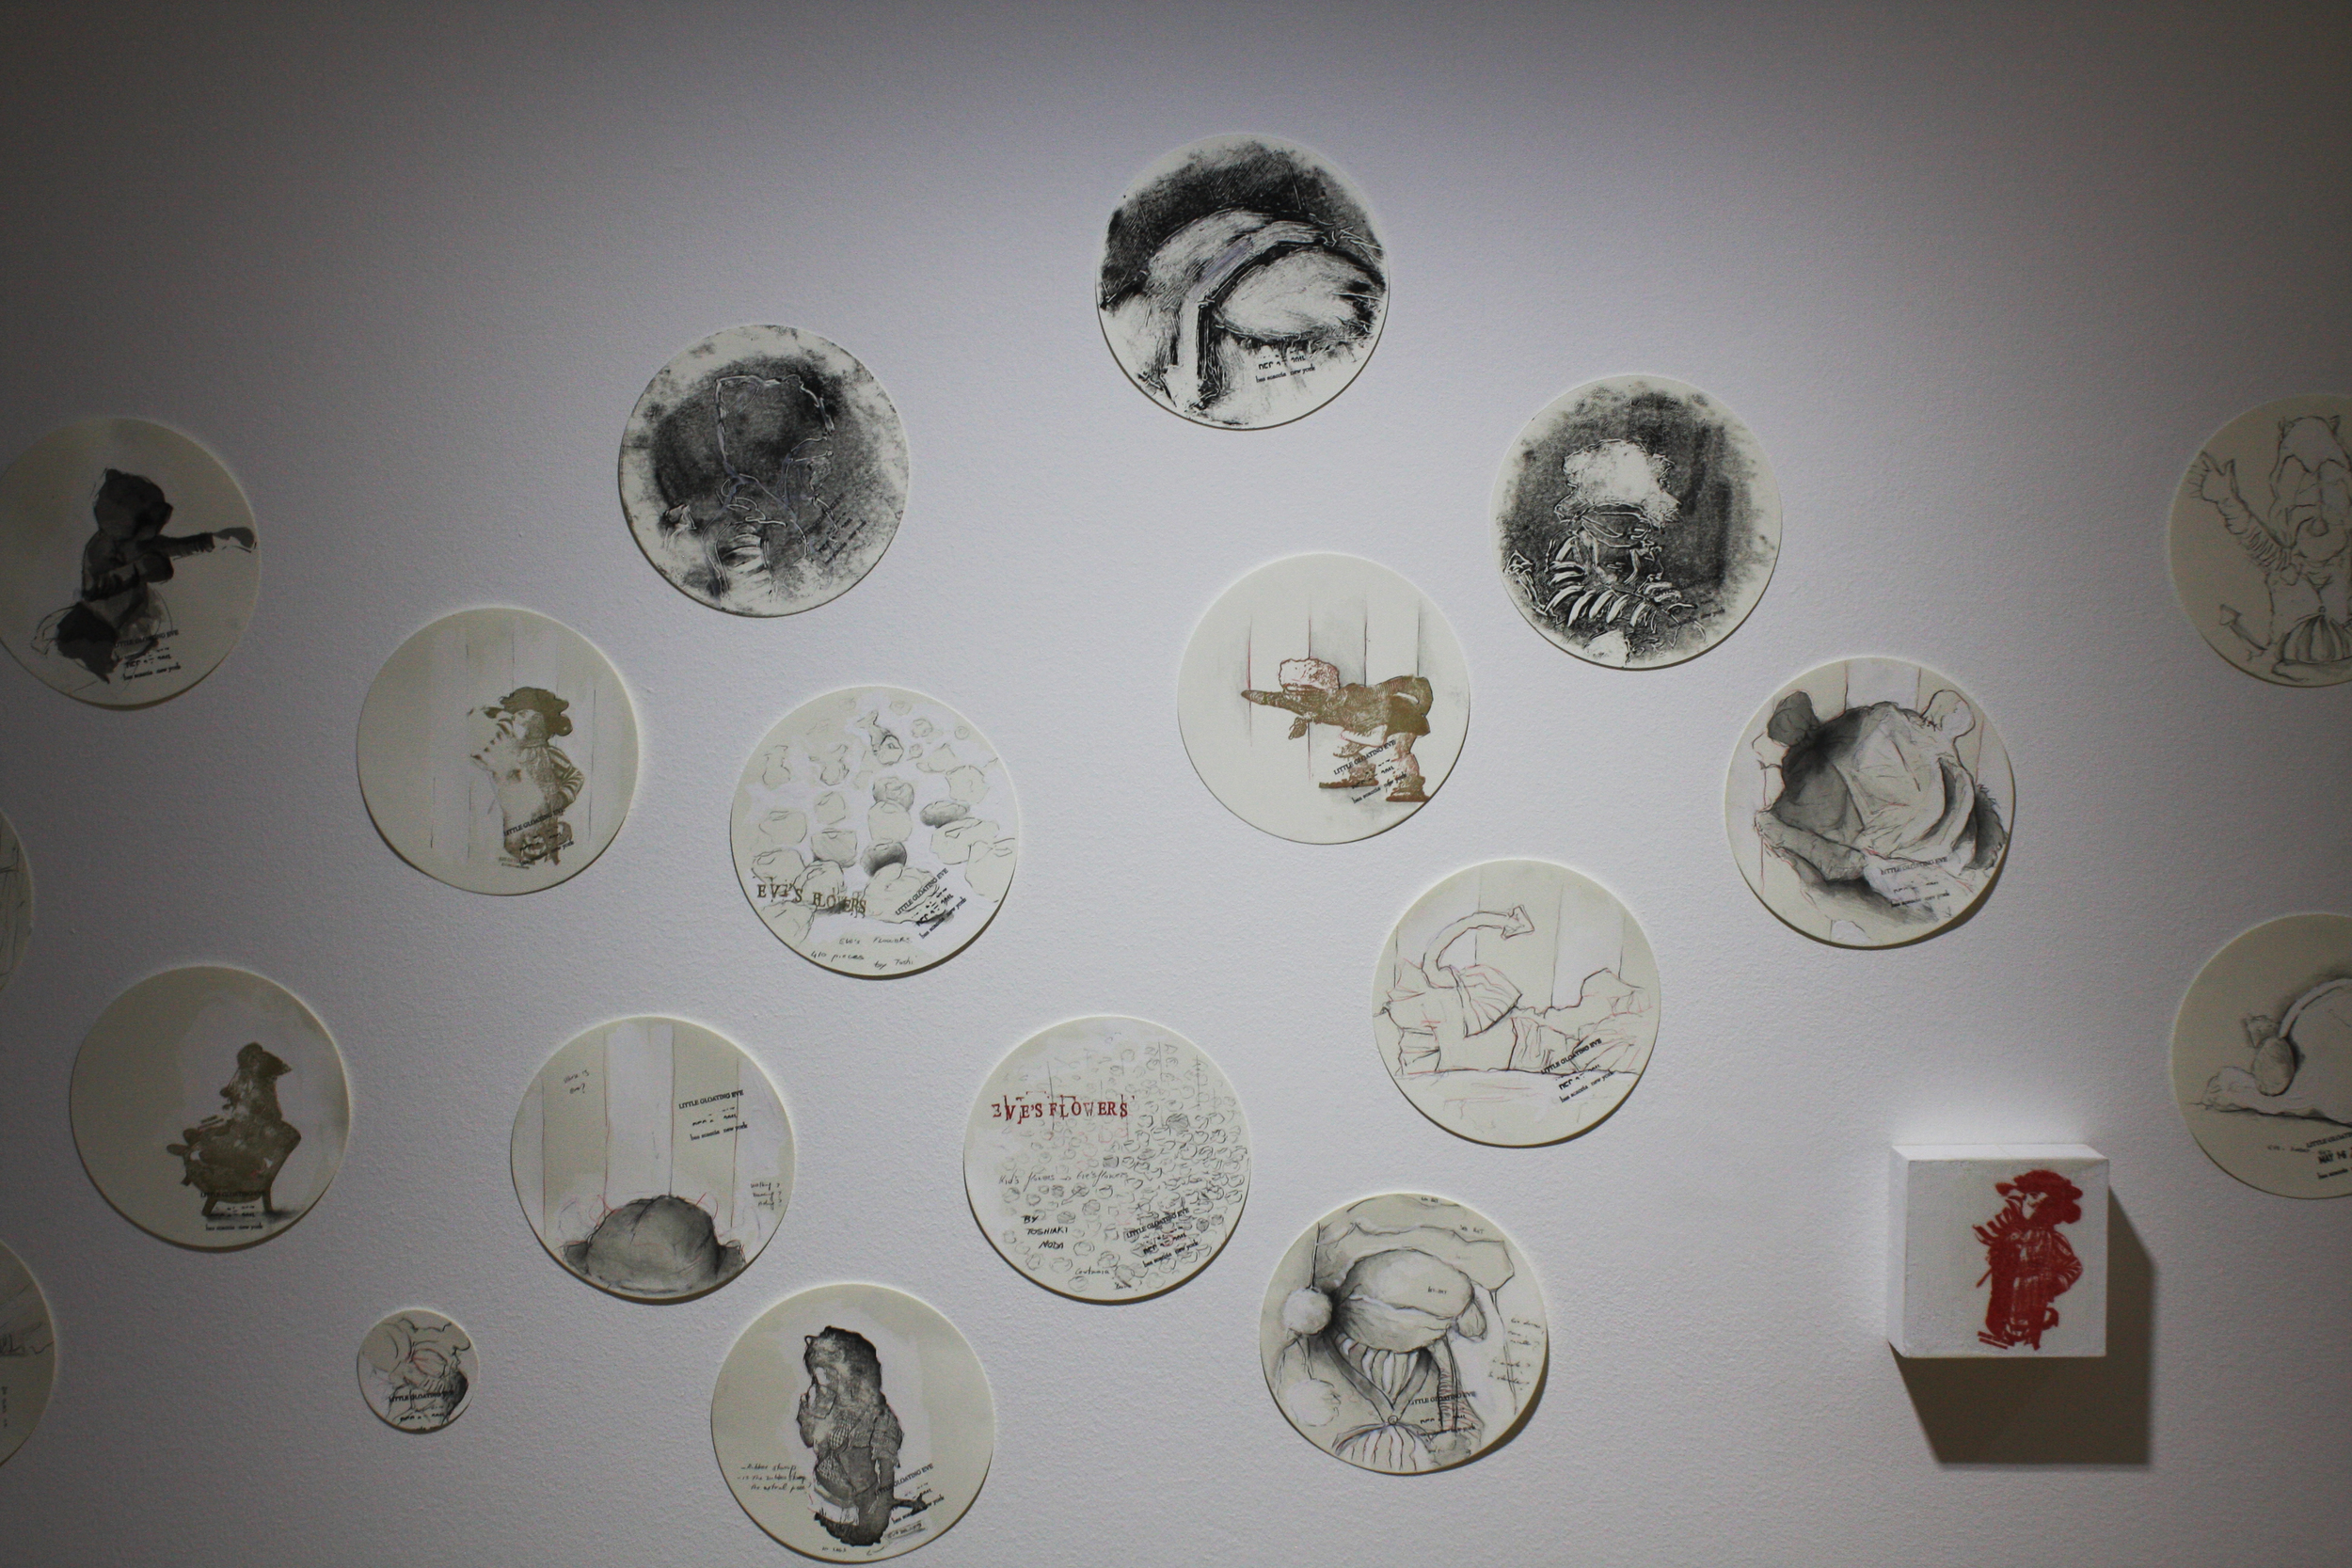  Little Gloating Eve, installation view, sketches  Effearte.&nbsp;Sept. 2014 